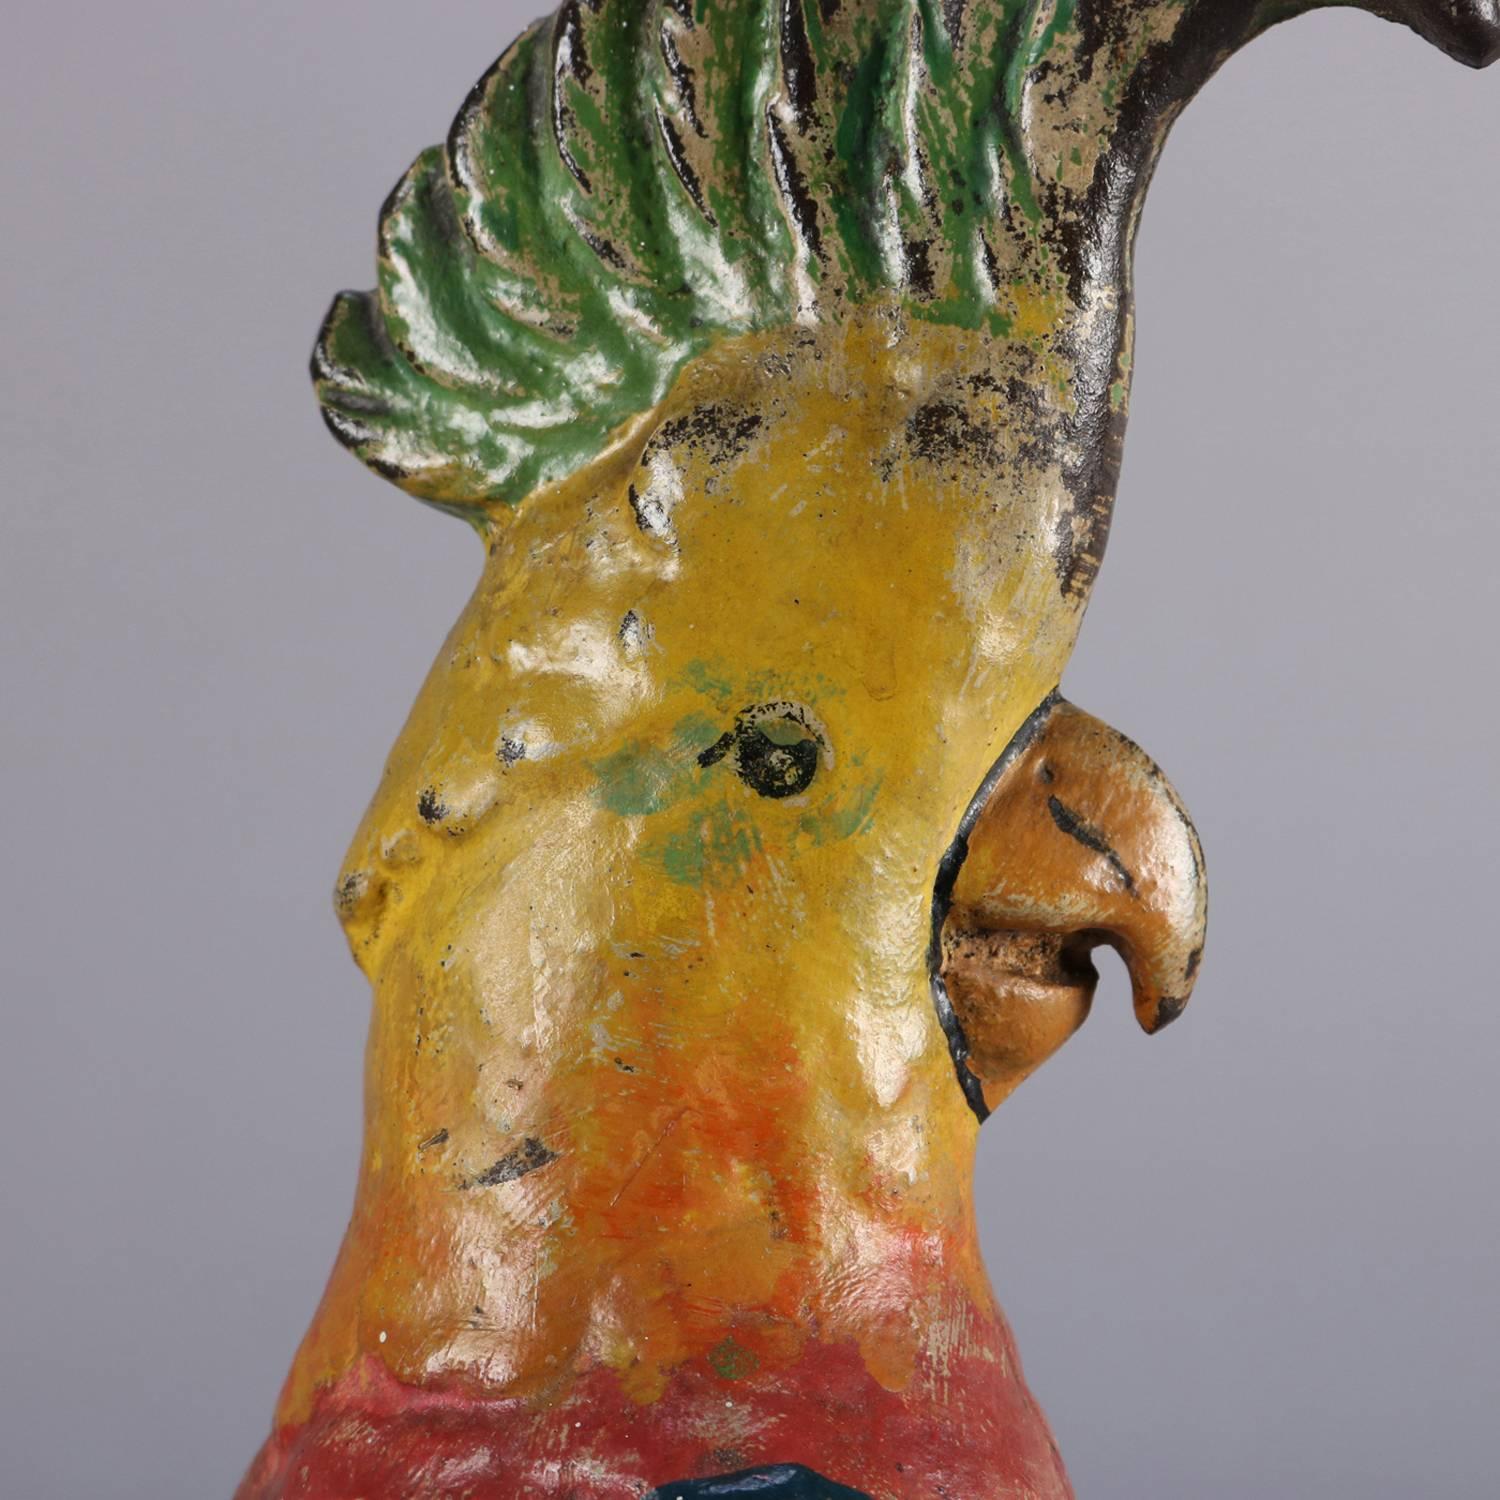 Antique figural cast iron doorstop features hand-painted polychromed bird sculpture of a parrot with flared crest and seated on a tree branch, reminiscent of Polly Parrot, circa 1890.

Measures: 14